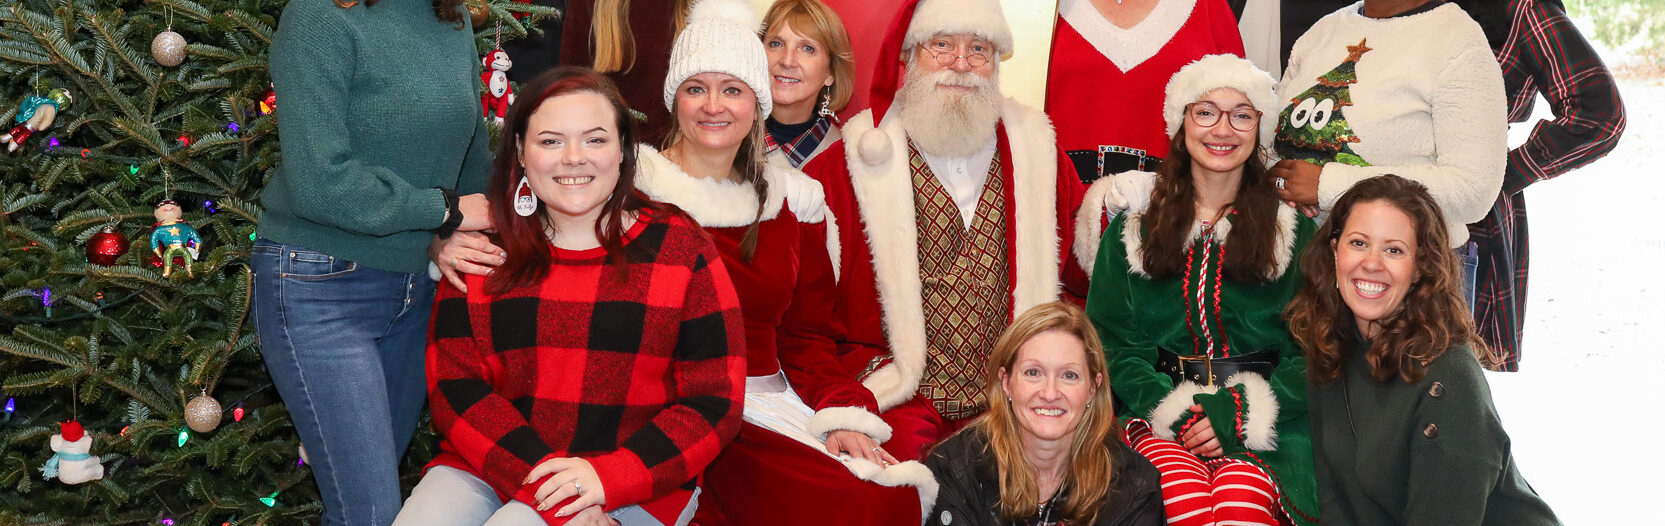 Committee and Volunteers photo with Santa